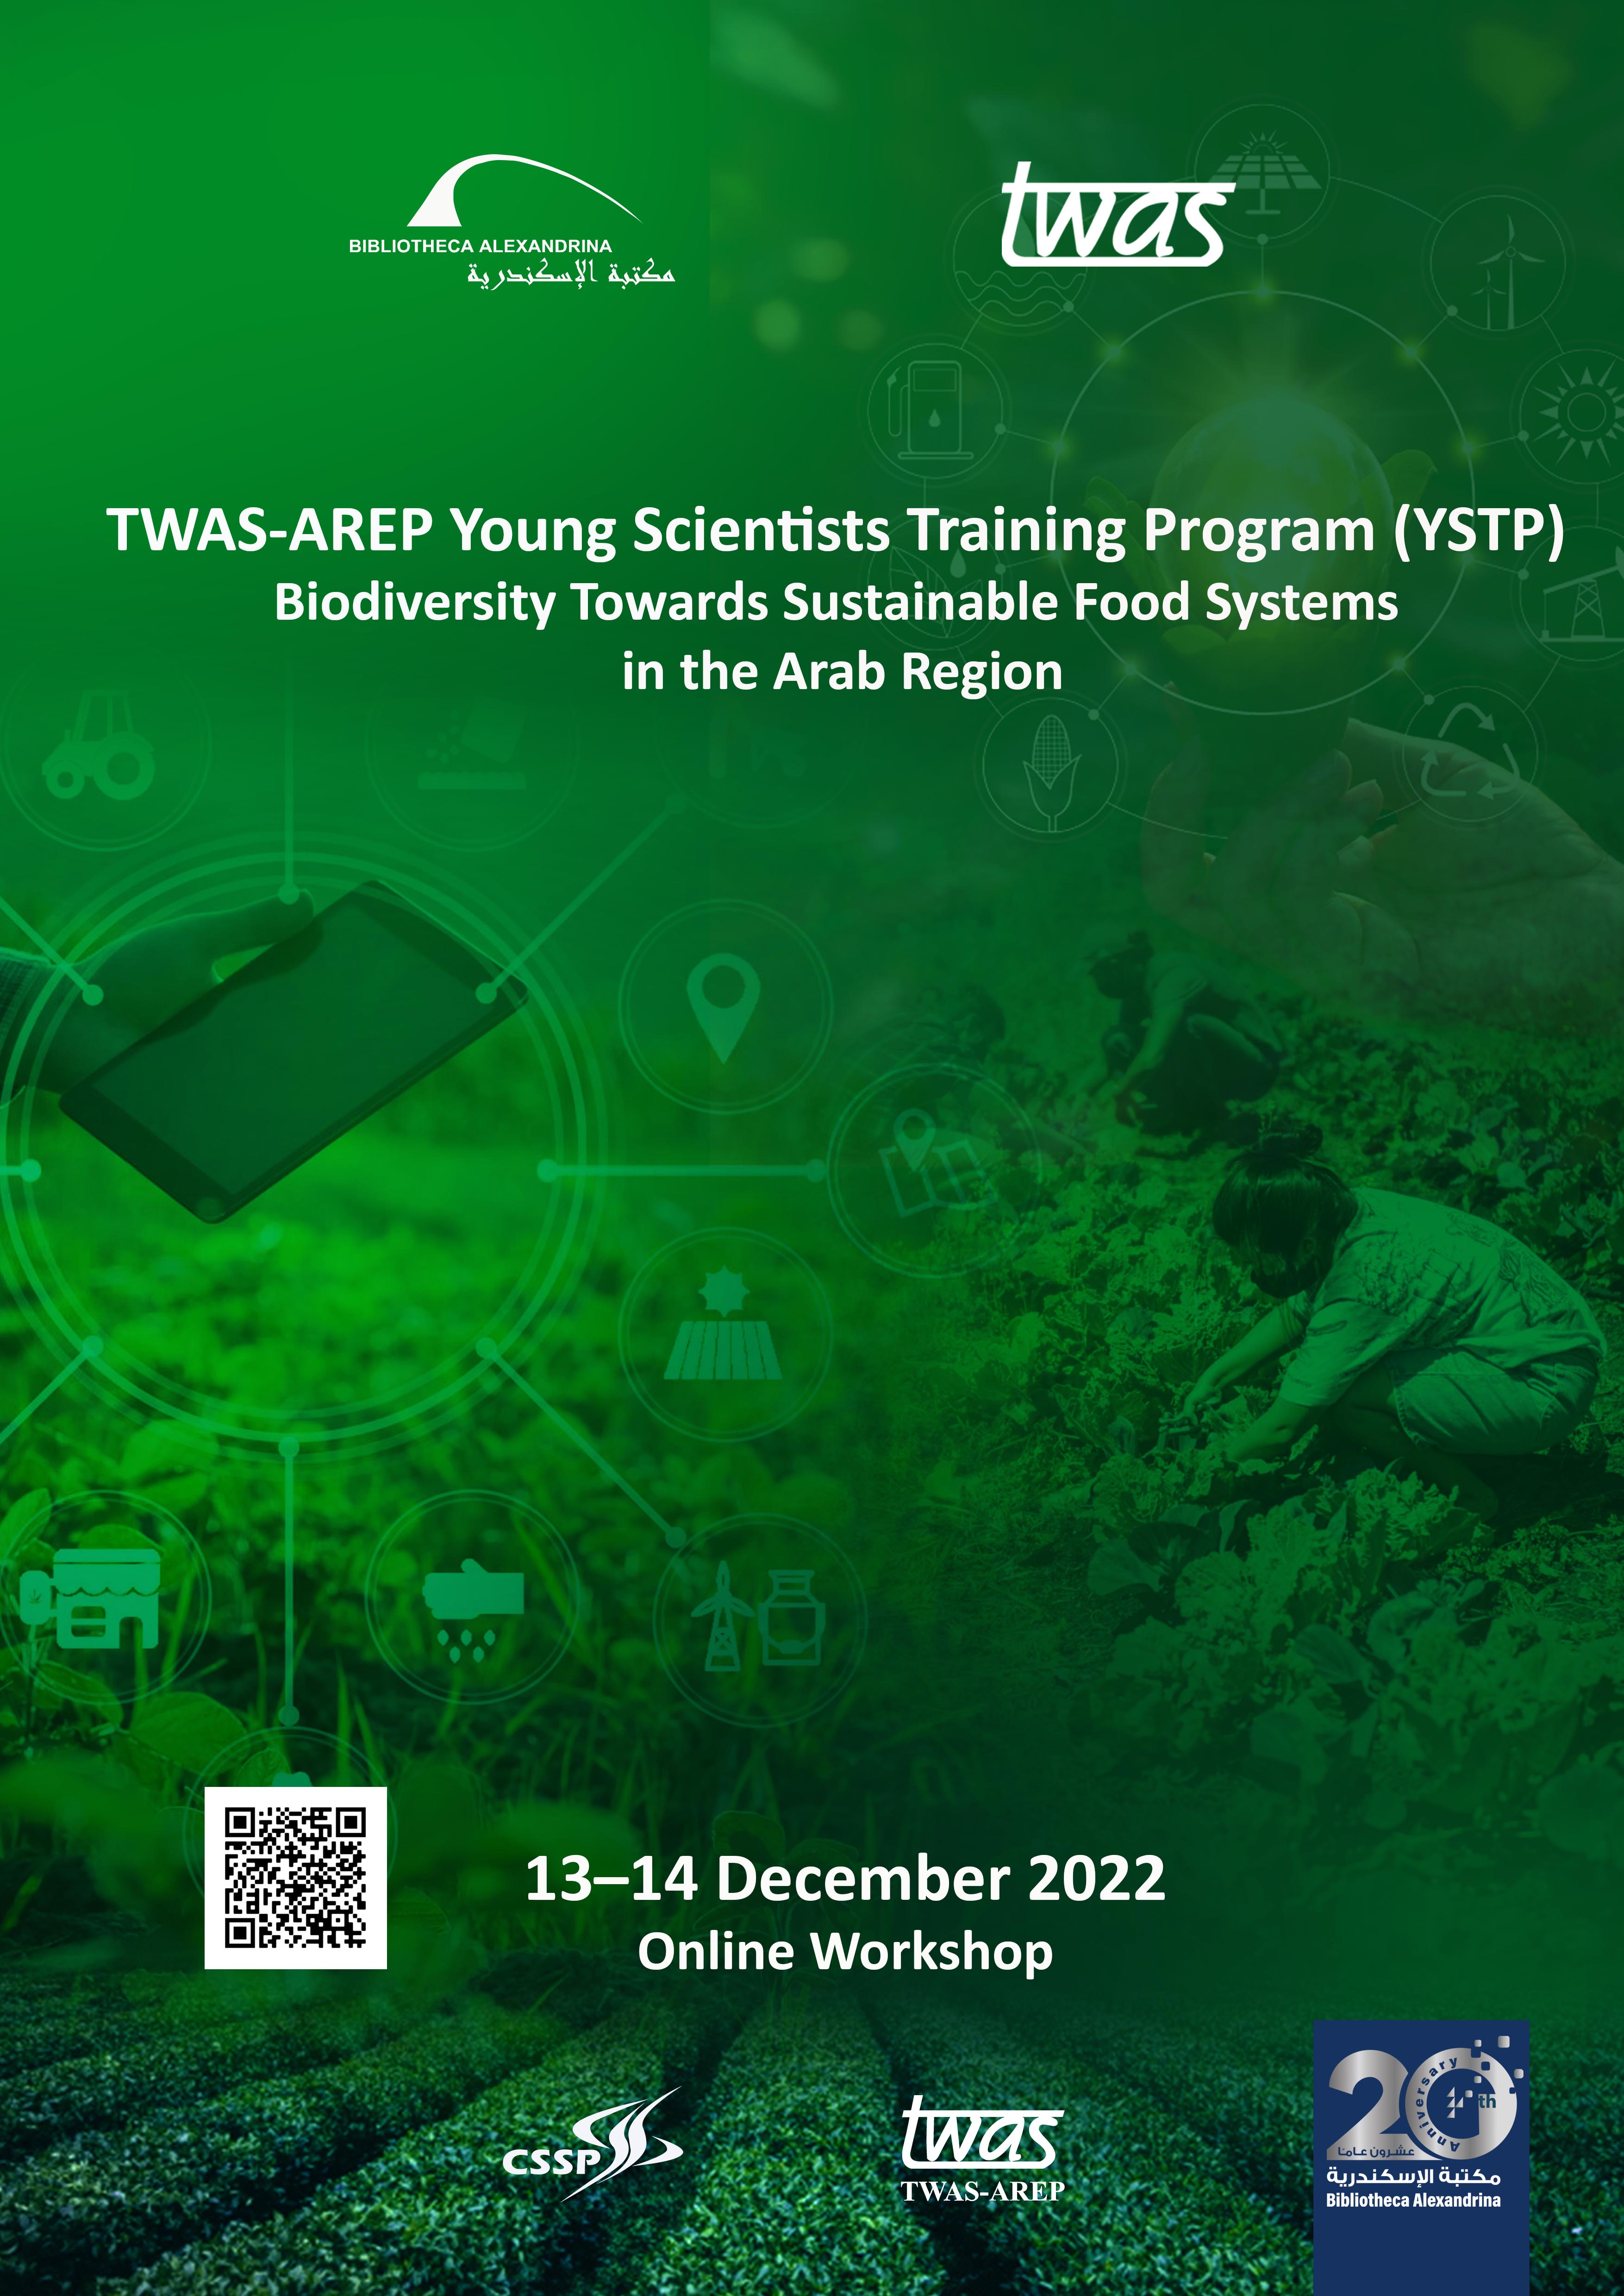 TWAS-AREP Young Scientists Training Program “Biodiversity towards Sustainable Food Systems in the Arab Region” online workshop